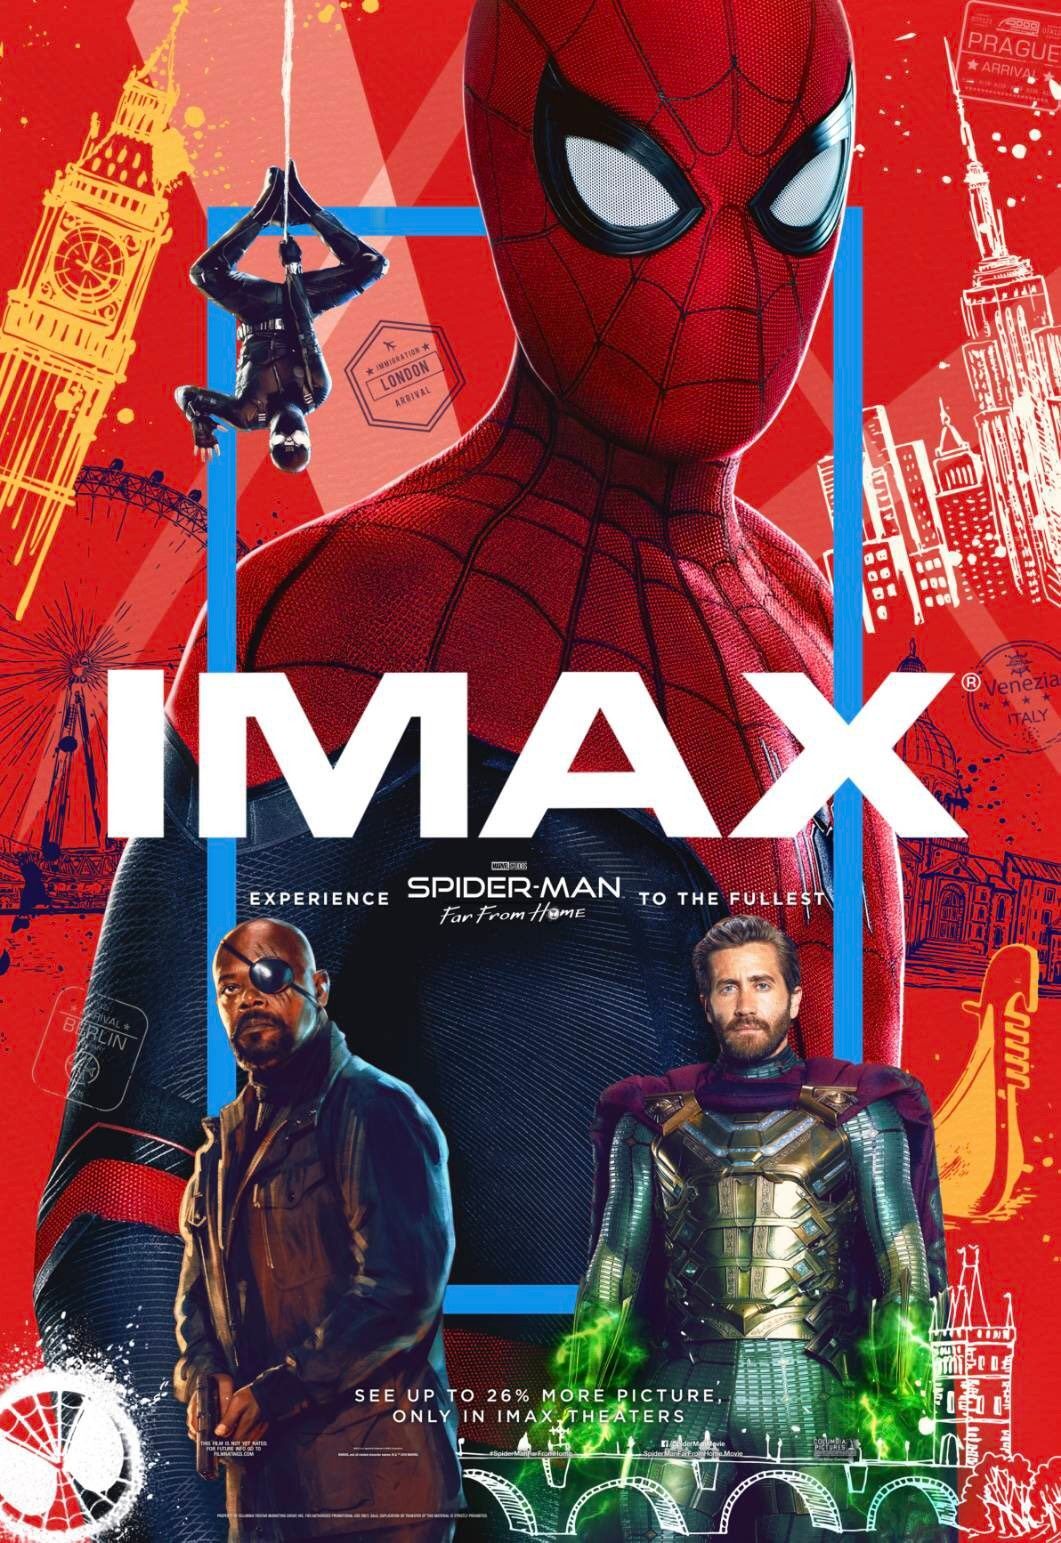 Far From Home IMAX Poster Shows Off Two of Spider-Man’s Suits